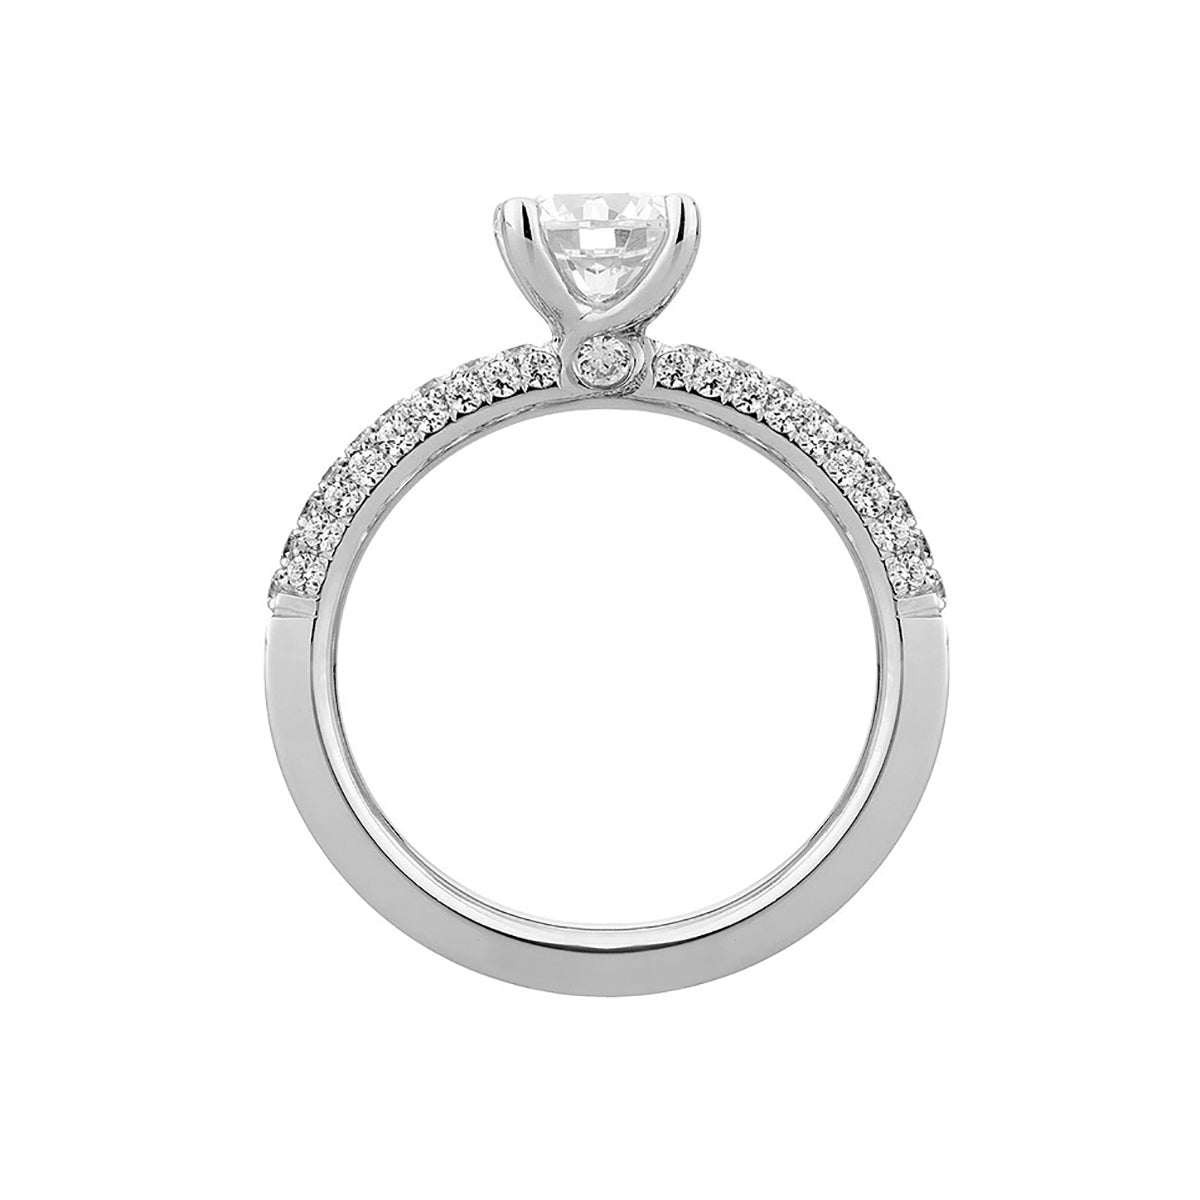 A.Jaffe Micro Pavé Rollover Diamond Engagement Ring ME1534/148